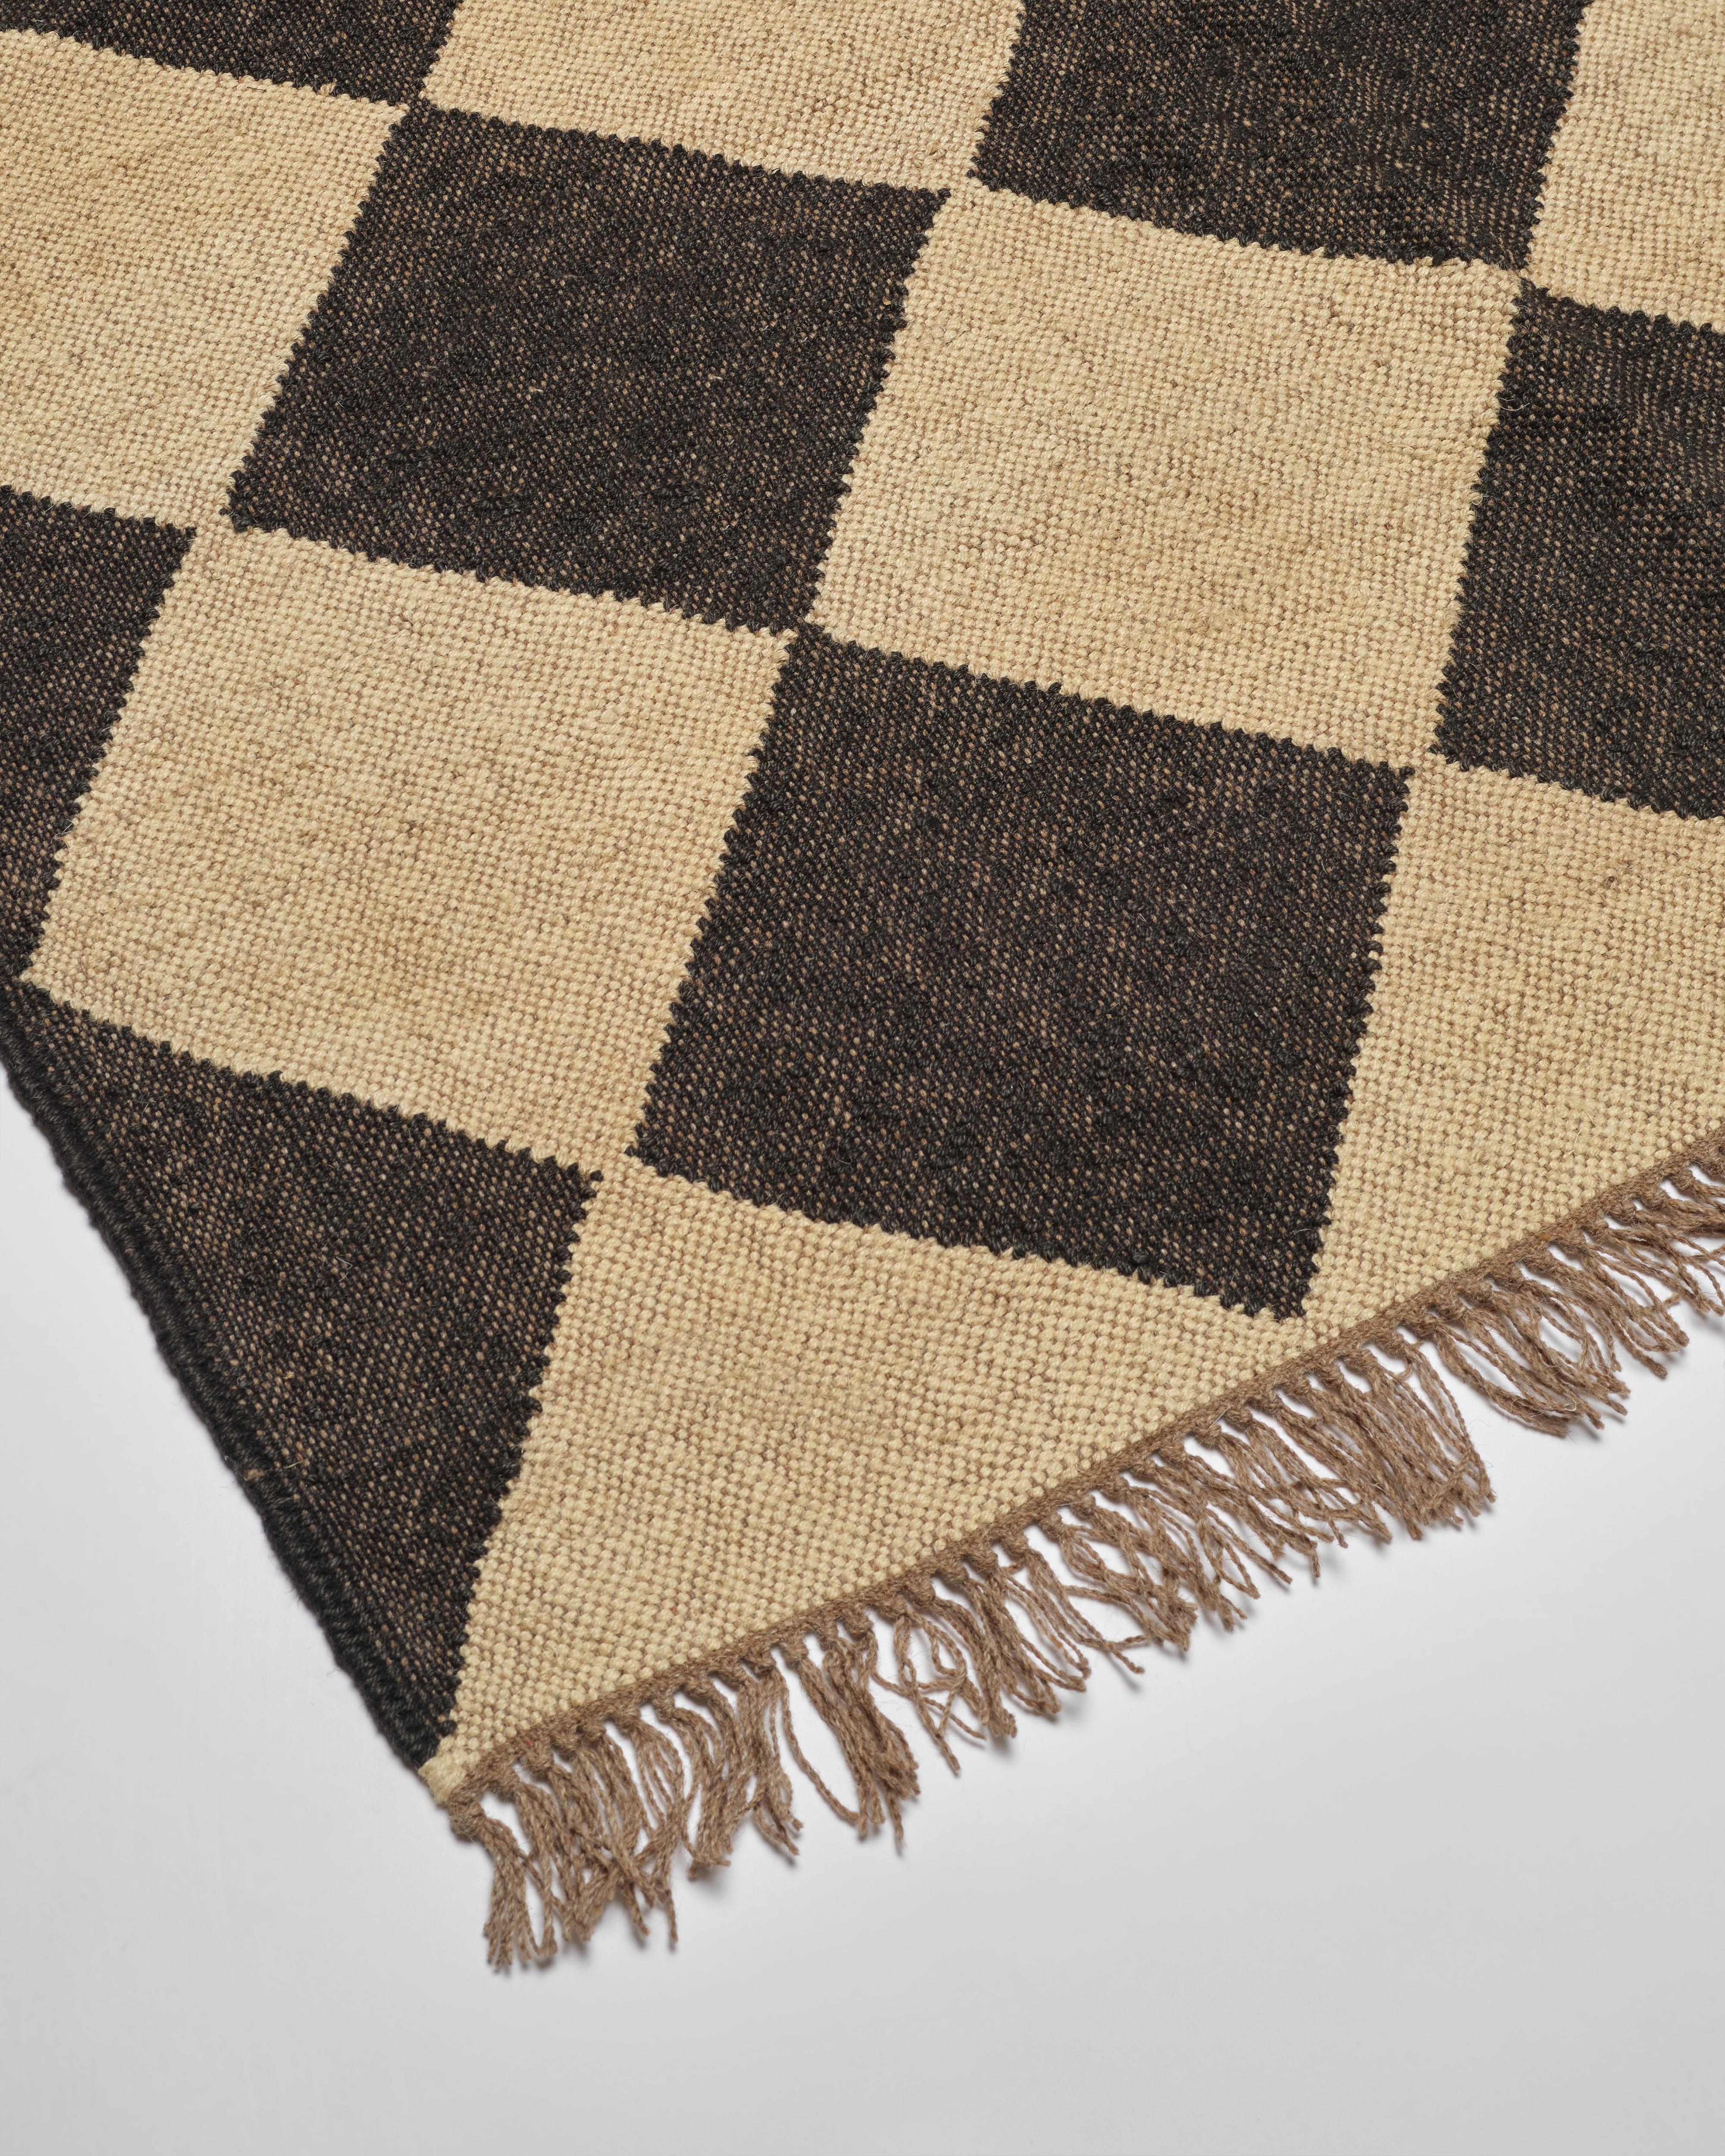 Our beautiful wool and jute checkerboard rugs are expertly handwoven in Jaipur, India. The diamond checkerboard pattern and neutral off black & natural coloring are chic and sophisticated with a hint of bohemian cool. These bigger checks are